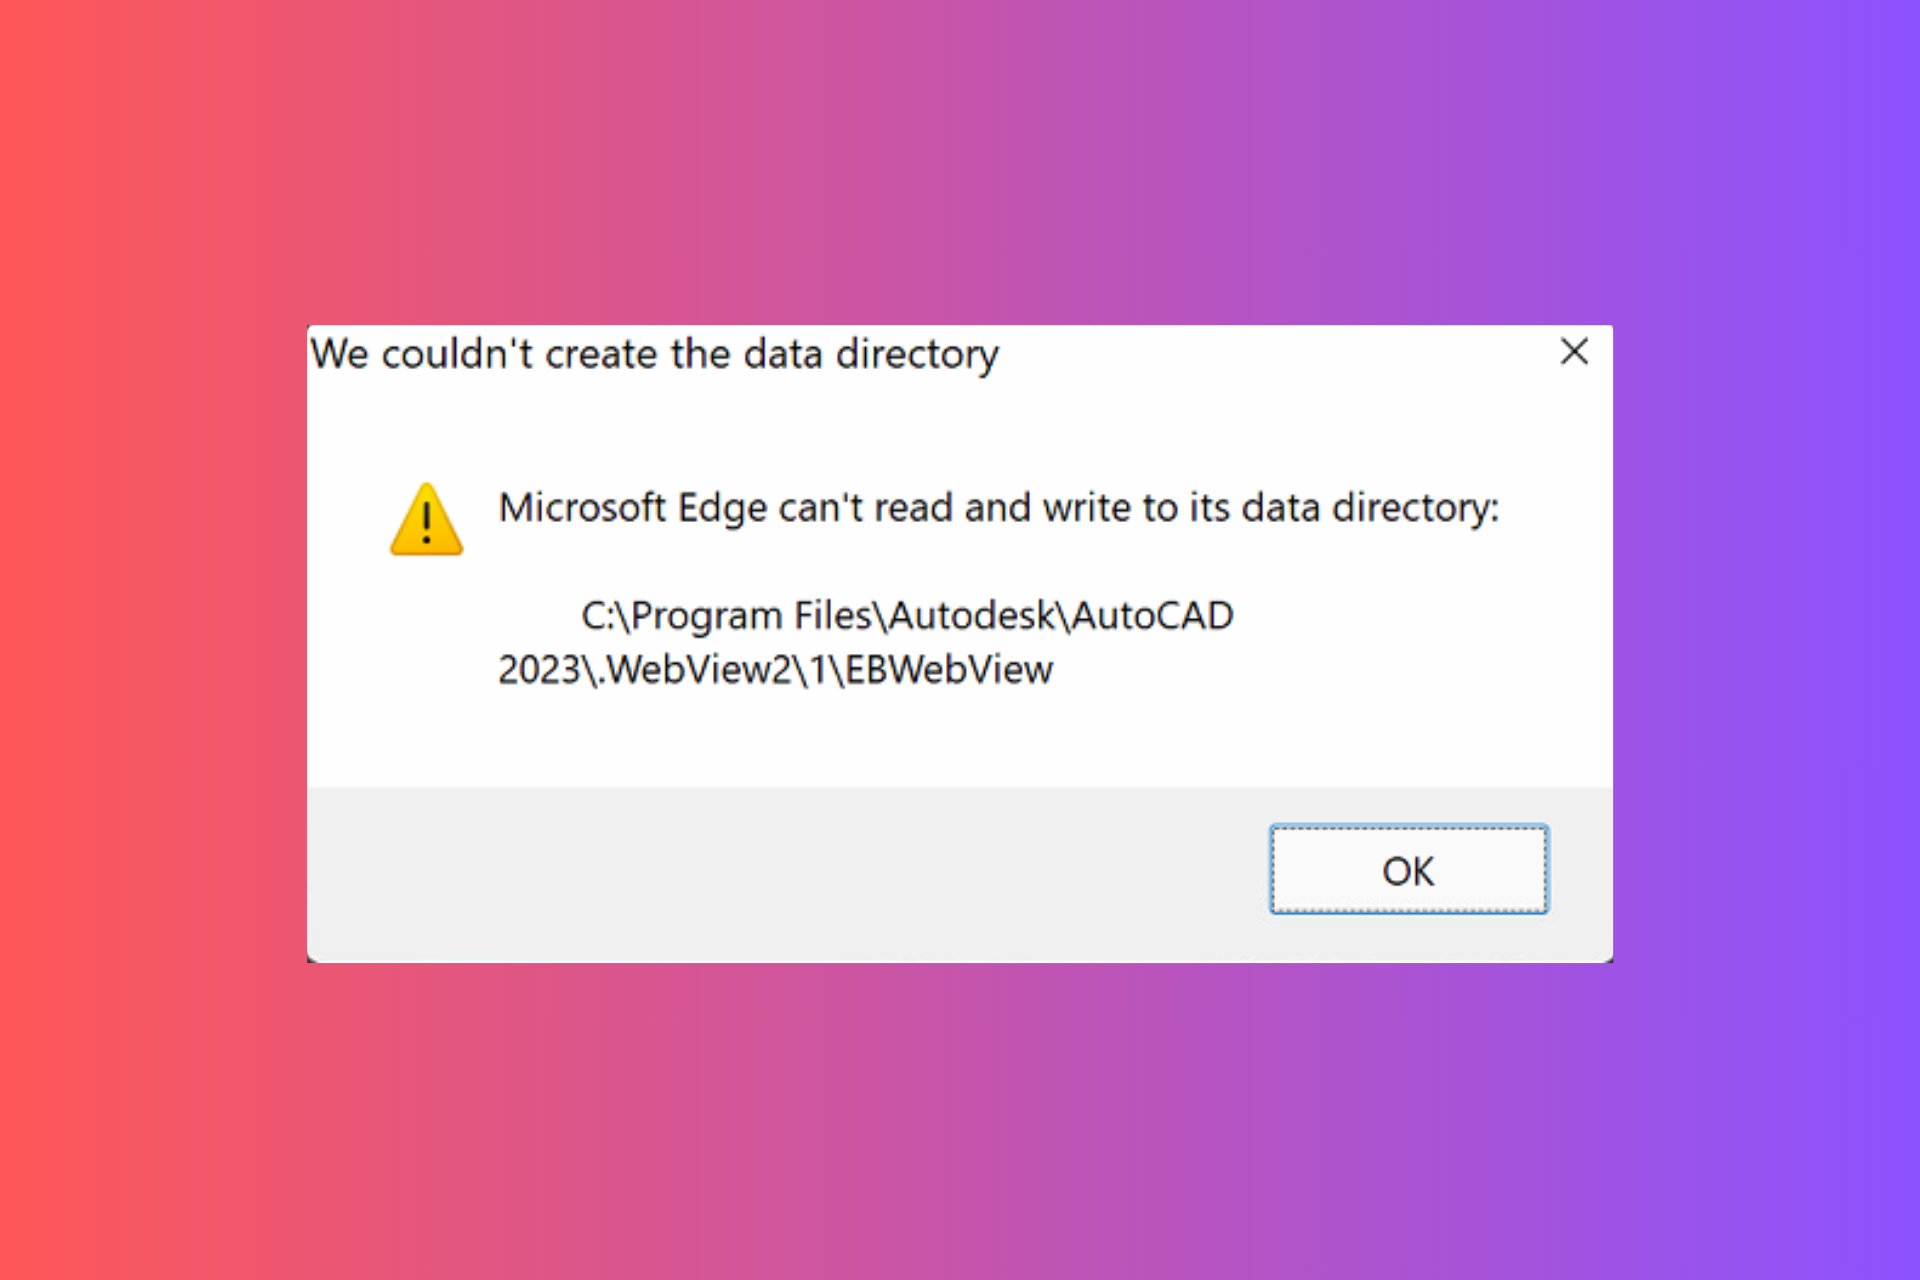 What do I do if Microsoft Edge can't read and write to its data directory error